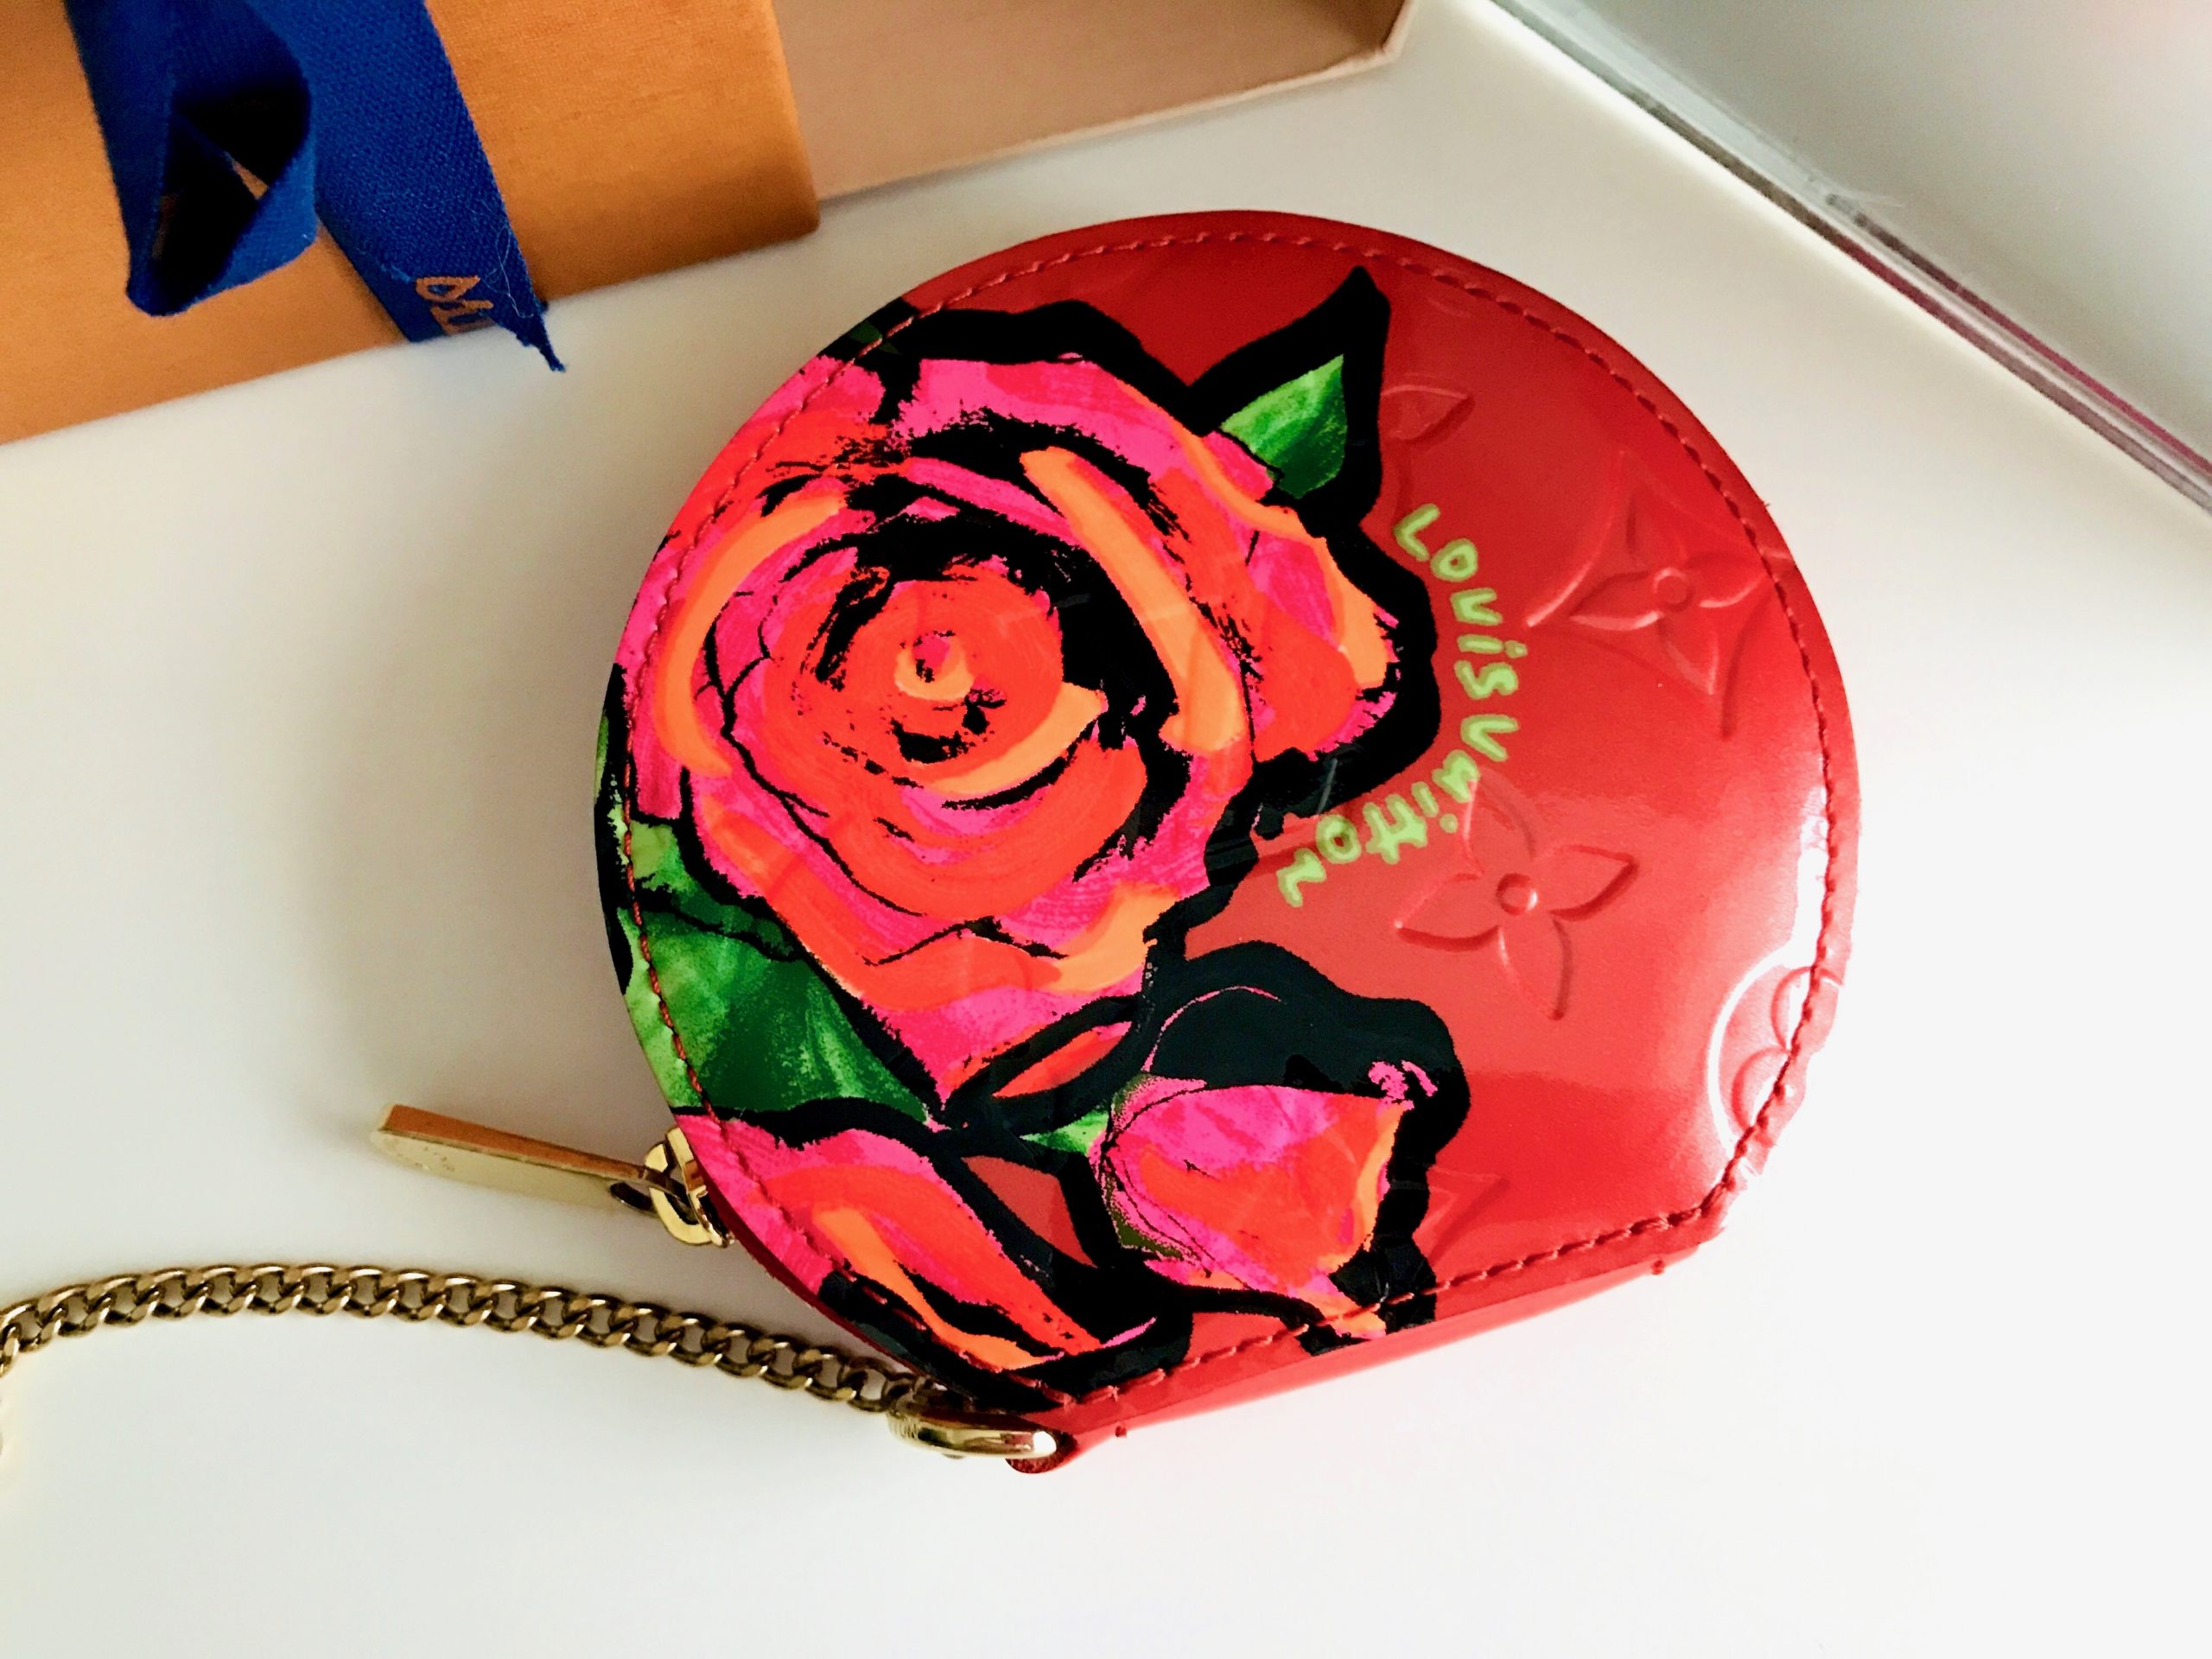 Louis Vuitton Limited Edition Bag Stephen Sprouse x Monogram Roses